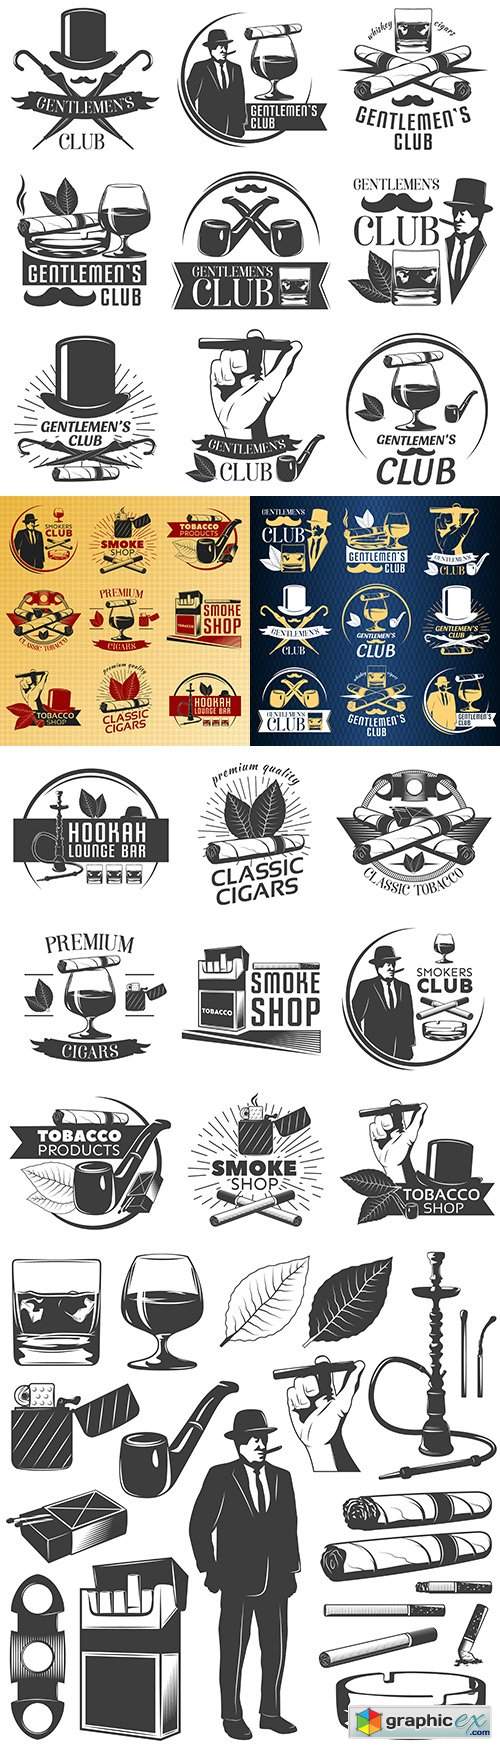  Vintage antique emblems and logos with text design 9 